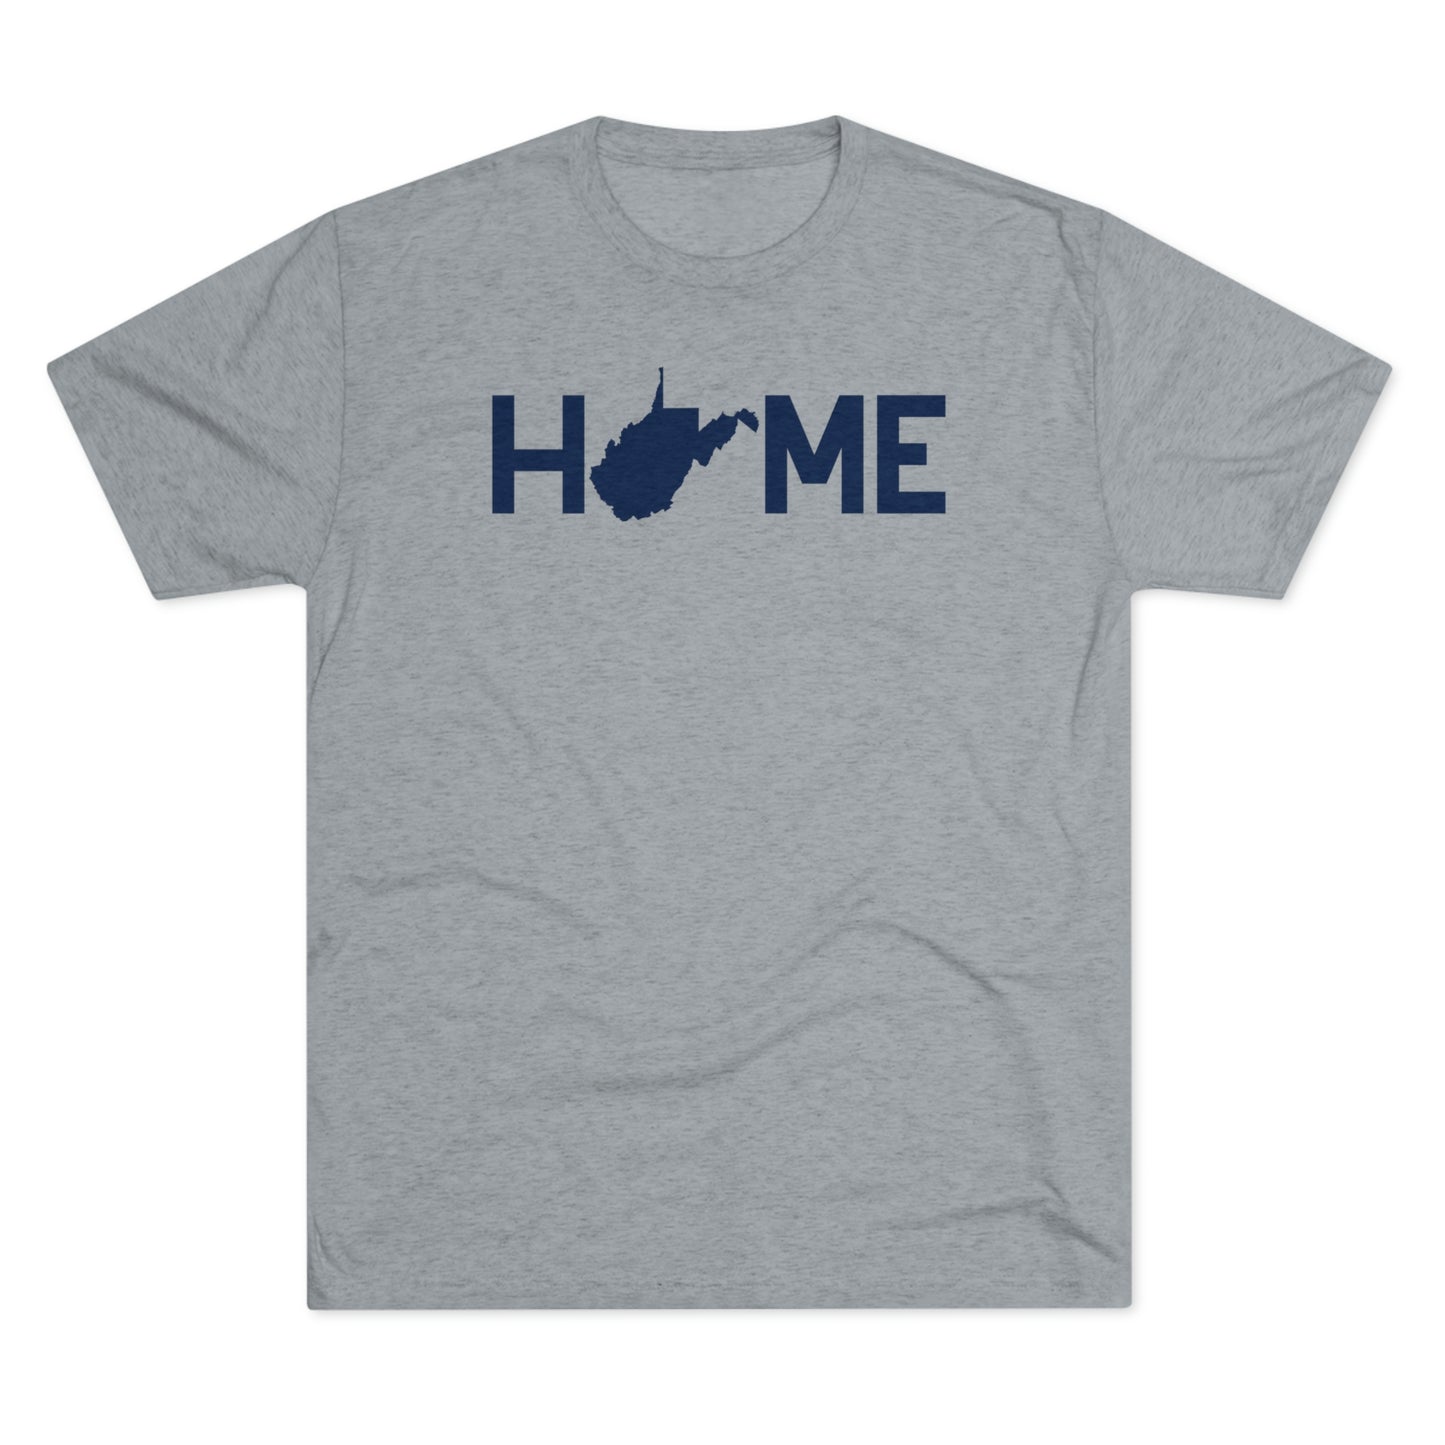 HOME_WV STATE SHAPE SUBSTITUTION-Unisex Tri-Blend Crew Tee